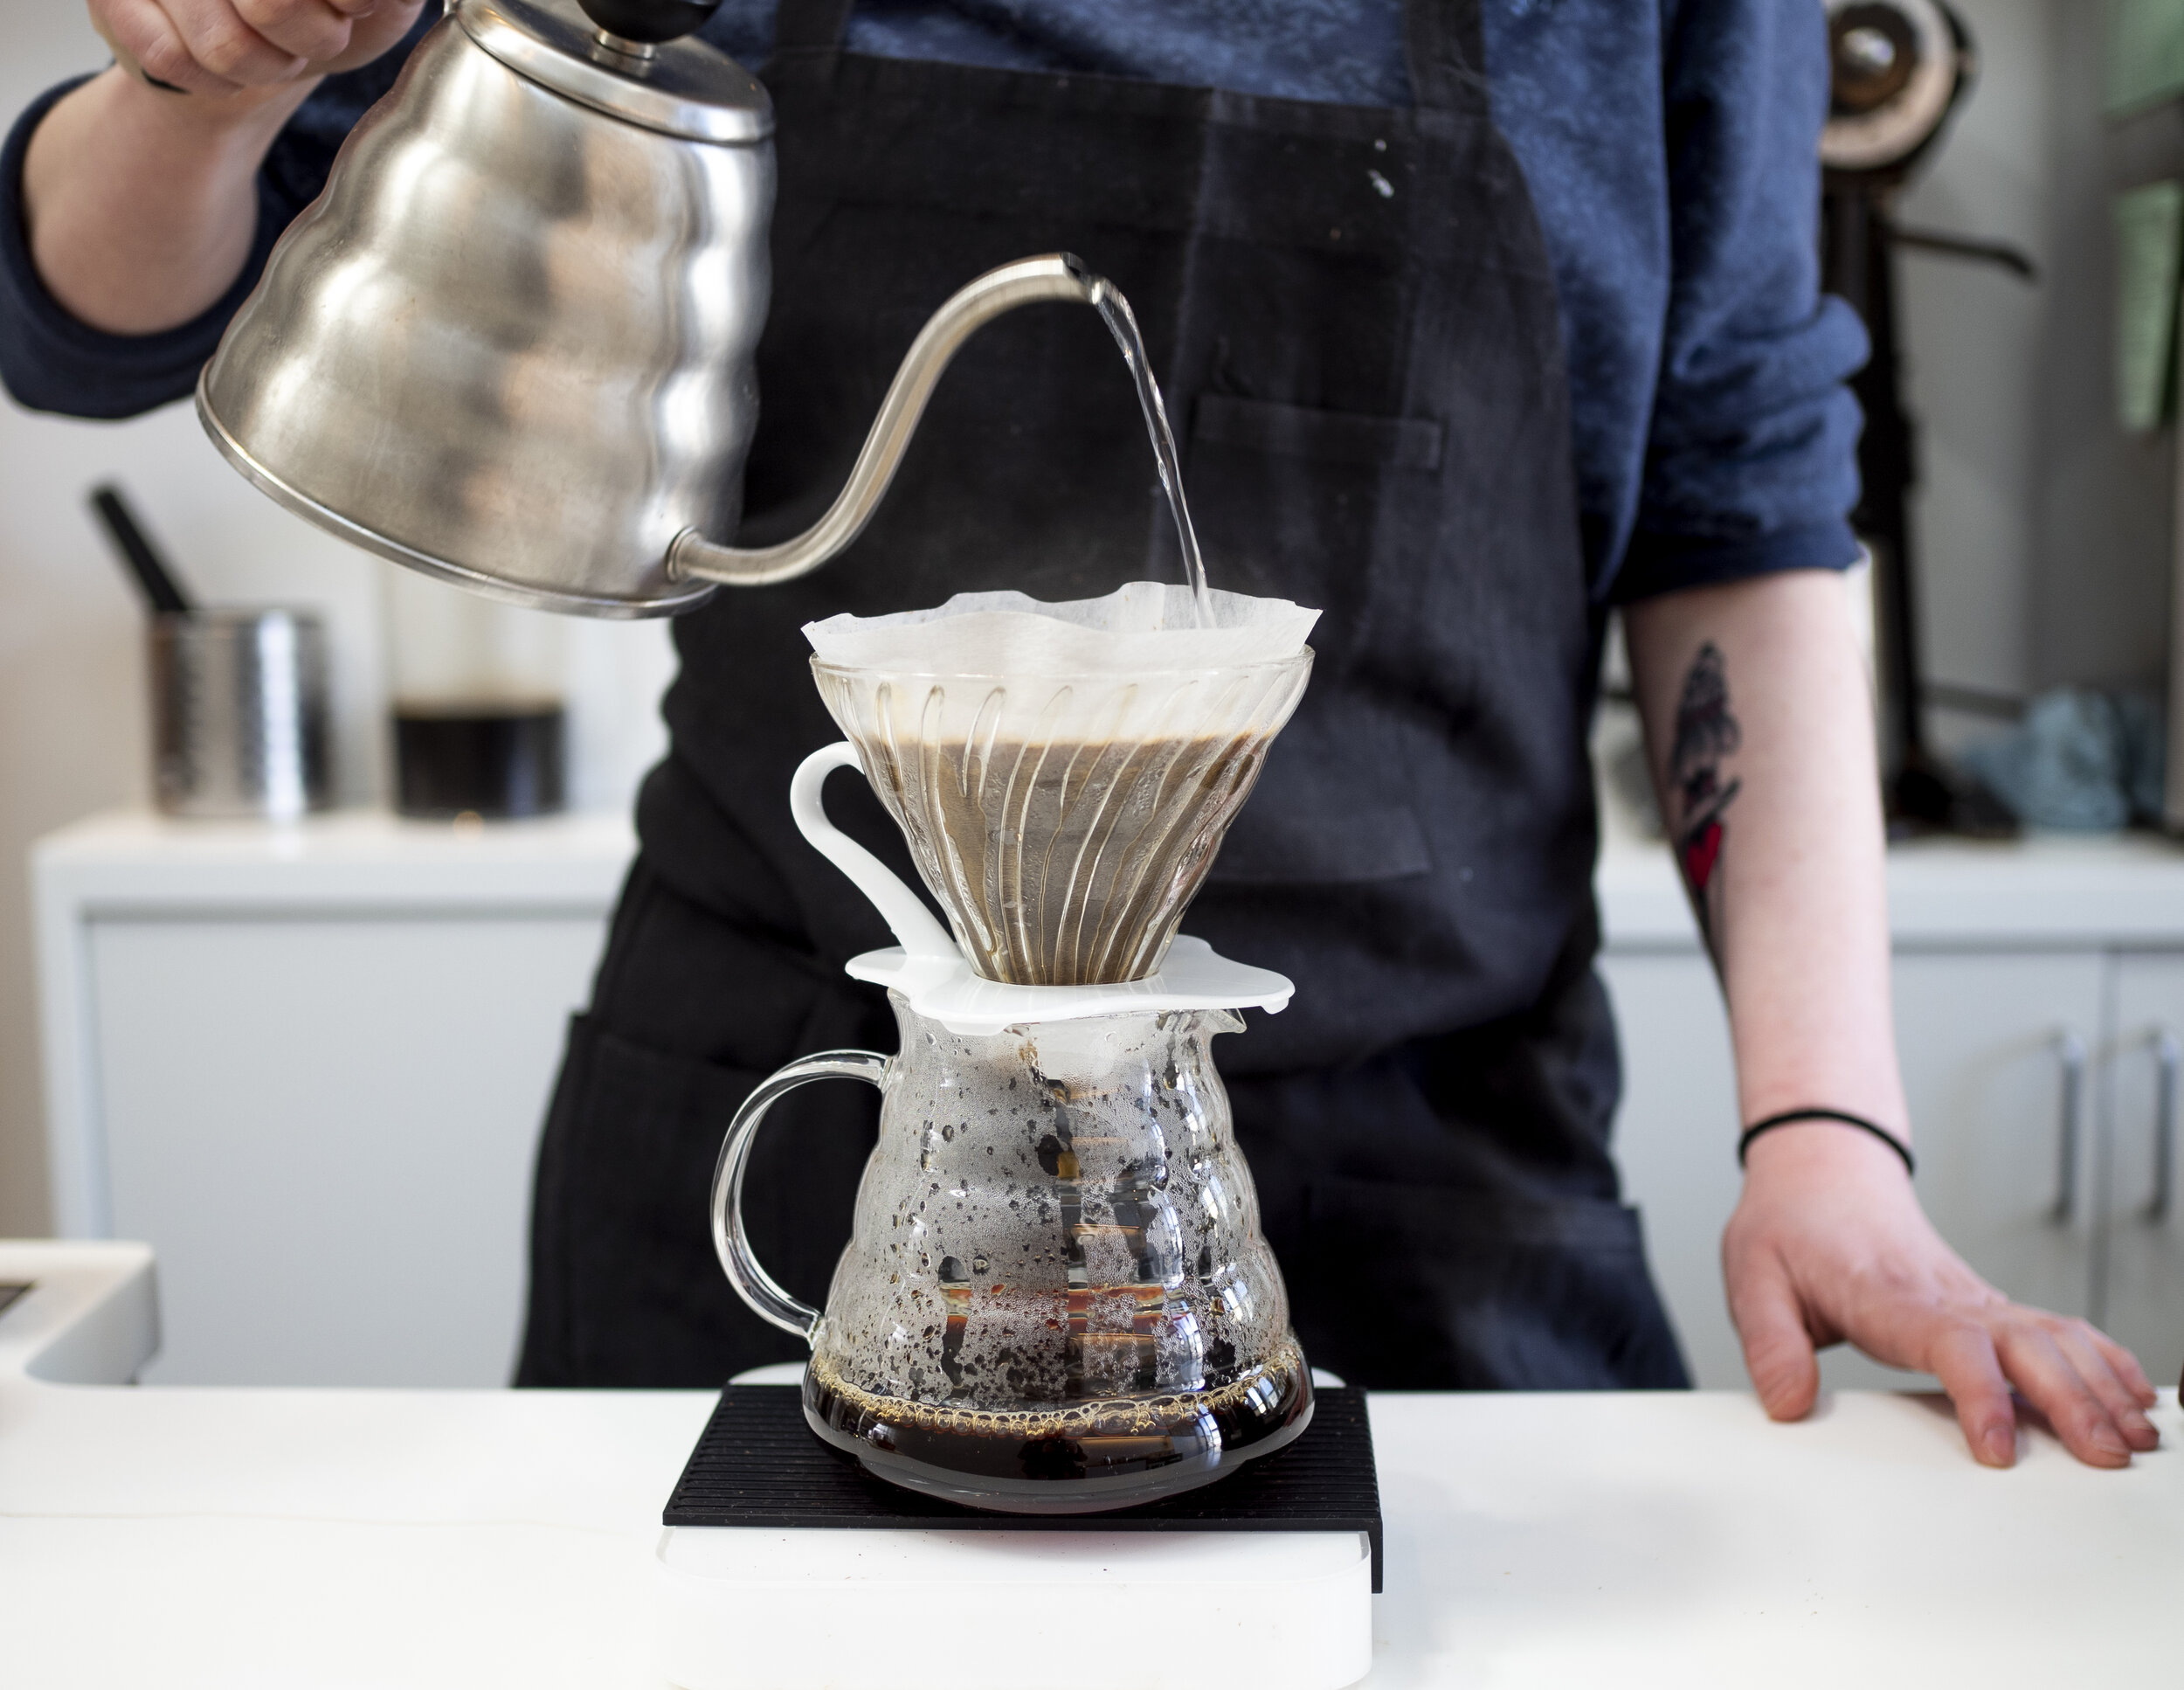 French Press vs AeroPress: What Is The Difference?